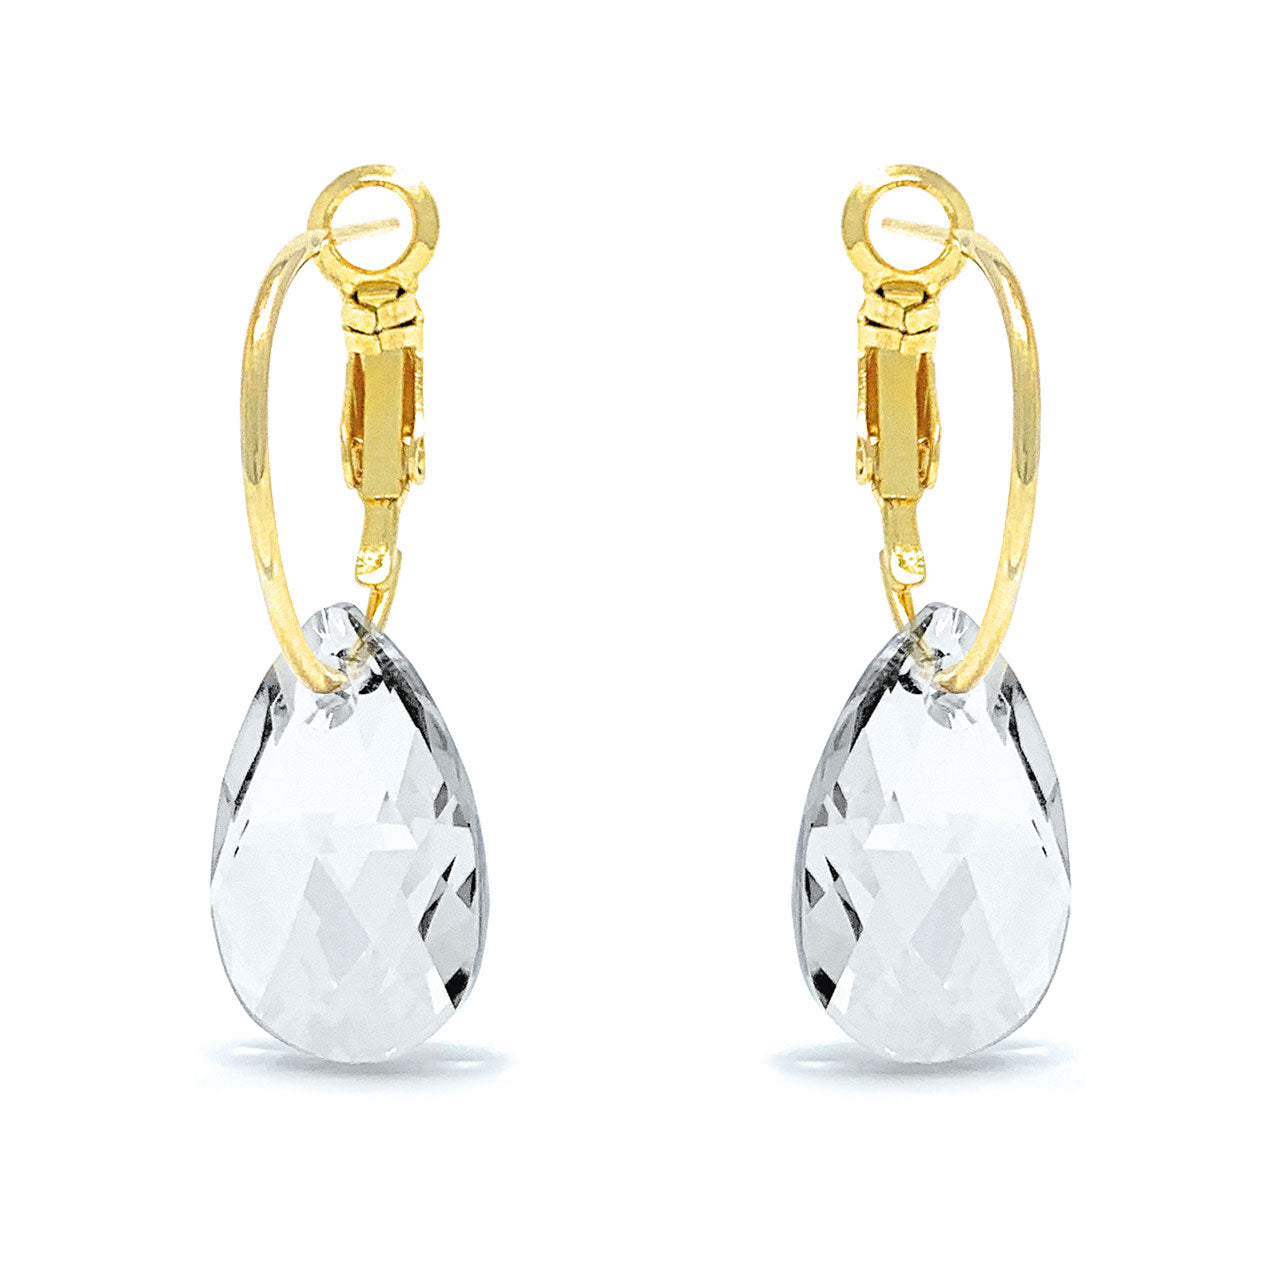 Aurora Small Drop Earrings with White Clear Pear Crystals from Swarovski Gold Plated - Ed Heart